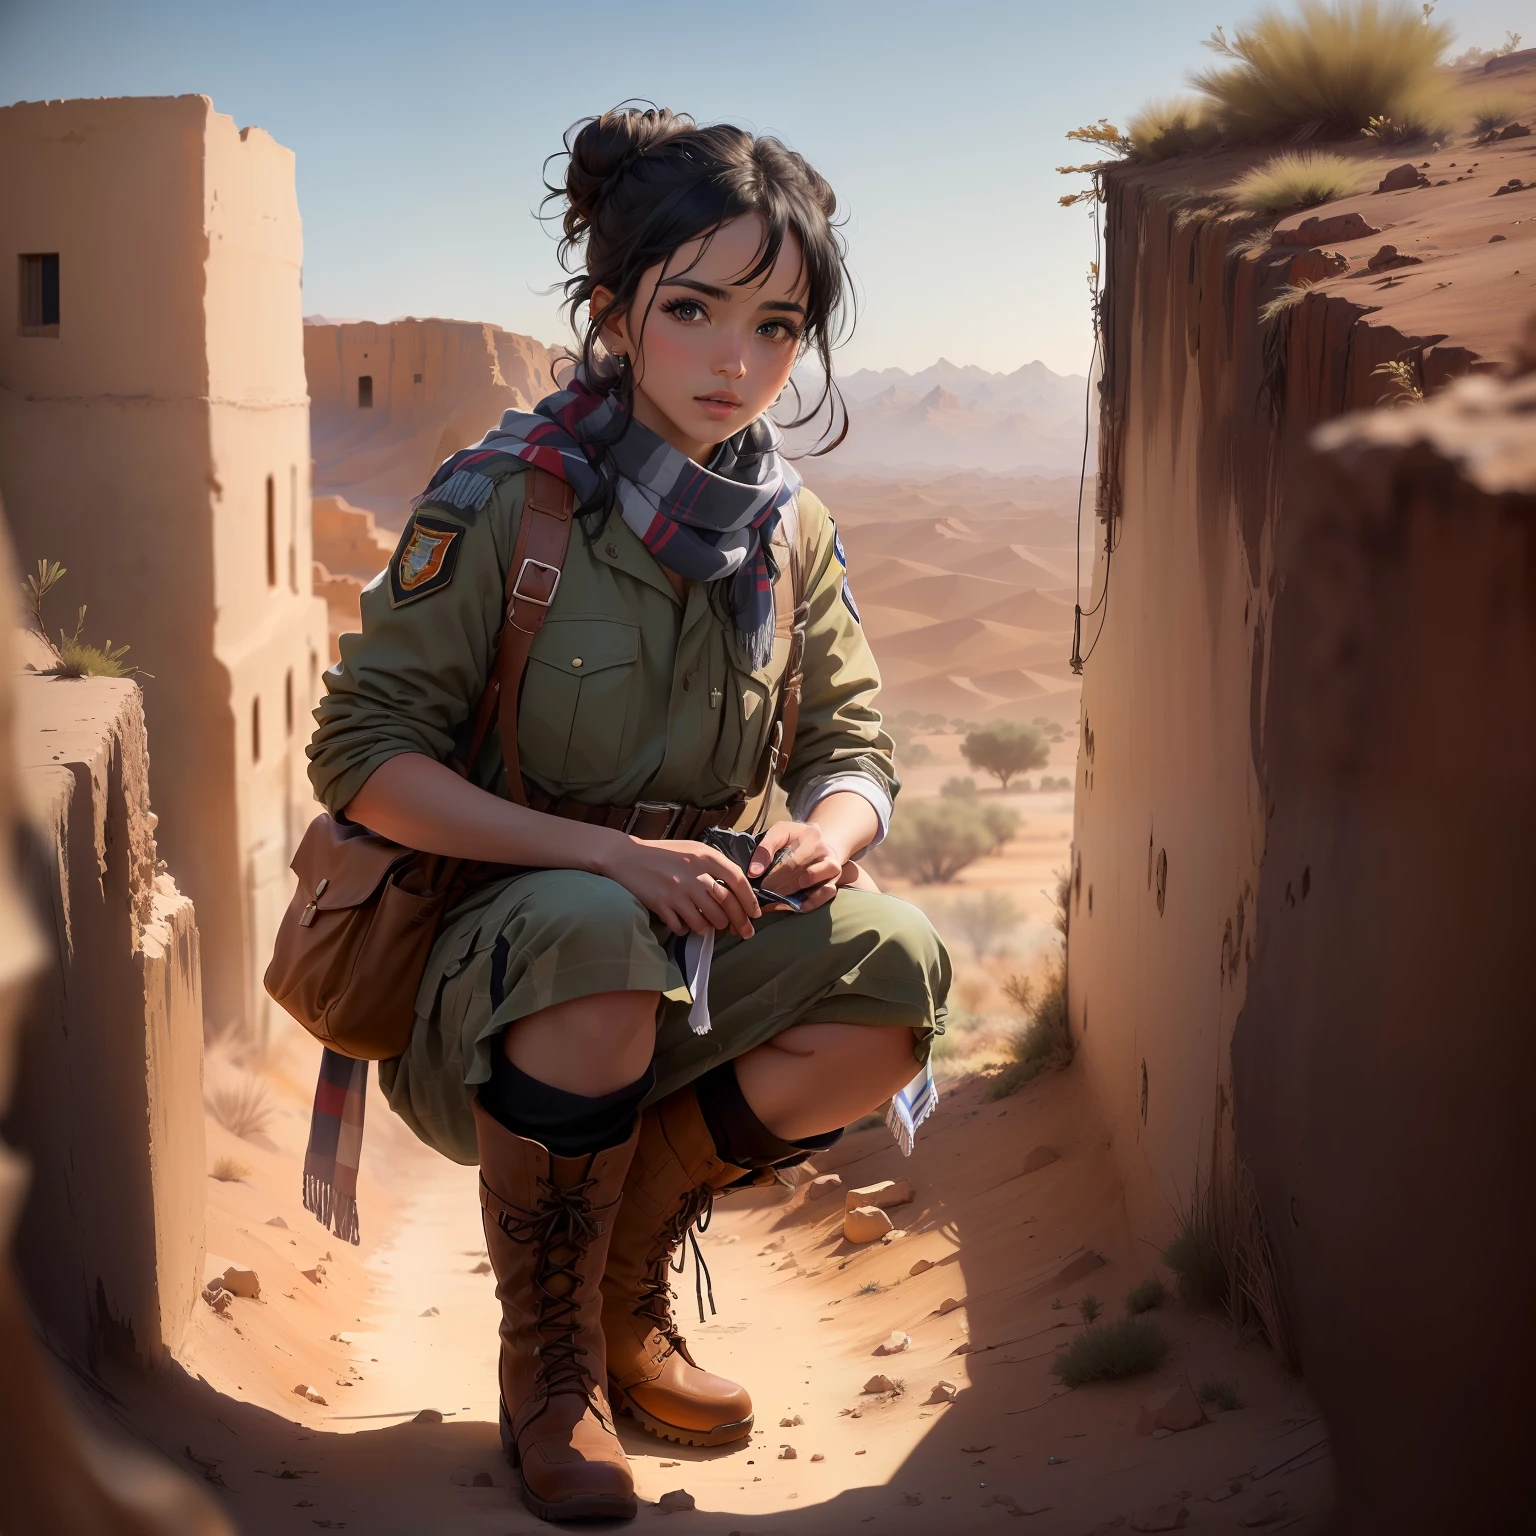 (Best quality, masterpiece, Best_quality,  detailed:1.5), Eritrean EPLF fighter: Wearing aged camouflage uniforms, Sturdy boots showing signs of extensive use, wearing scarf worn on head, and an old Eritrean flag patch, with black hair firmly wrapped in a bun and expressive black eyes in an epic landscape of Eritrea.